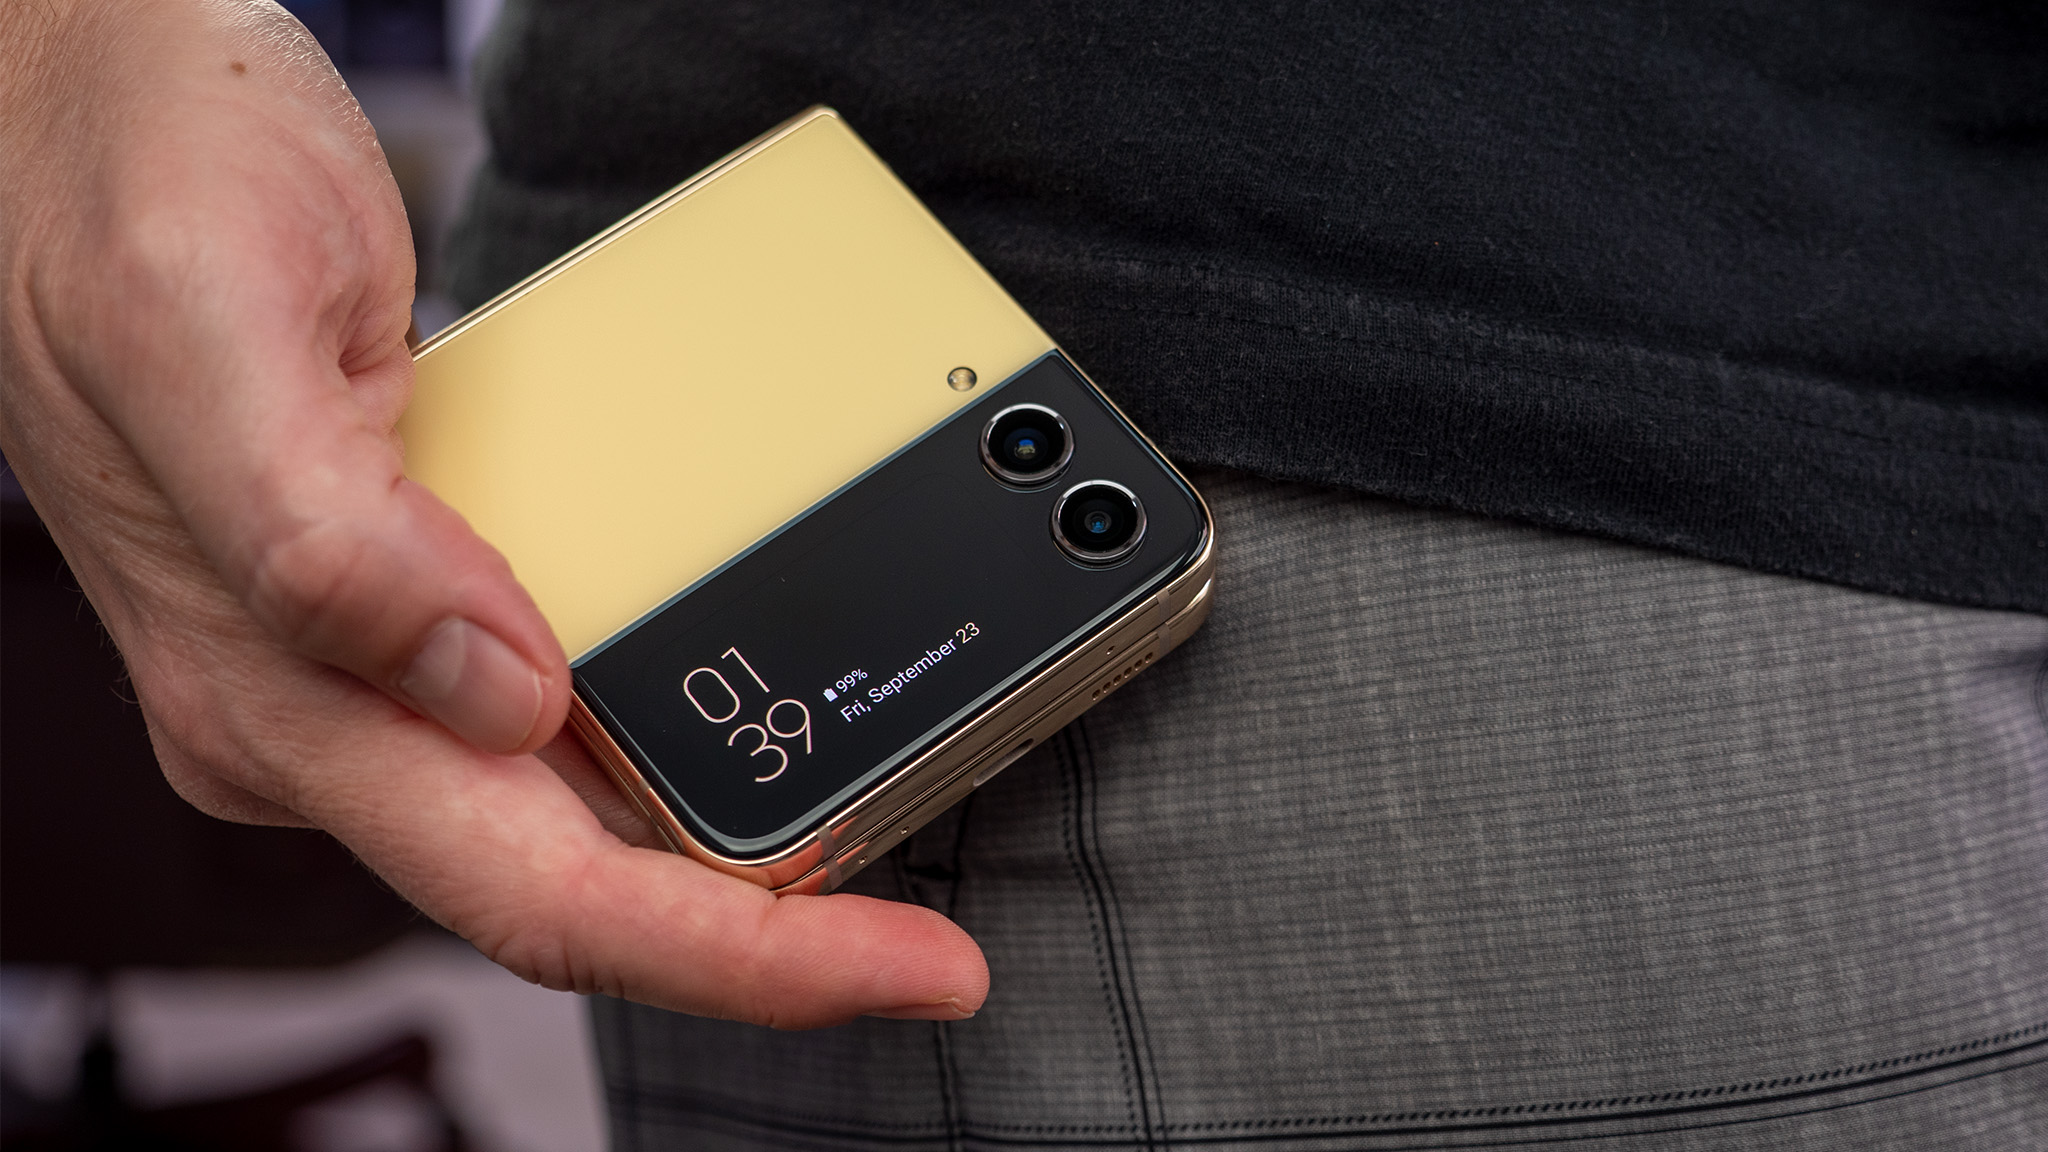 Samsung Galaxy Z Flip 4 Bespoke Edition with yellow backplates and gold trim